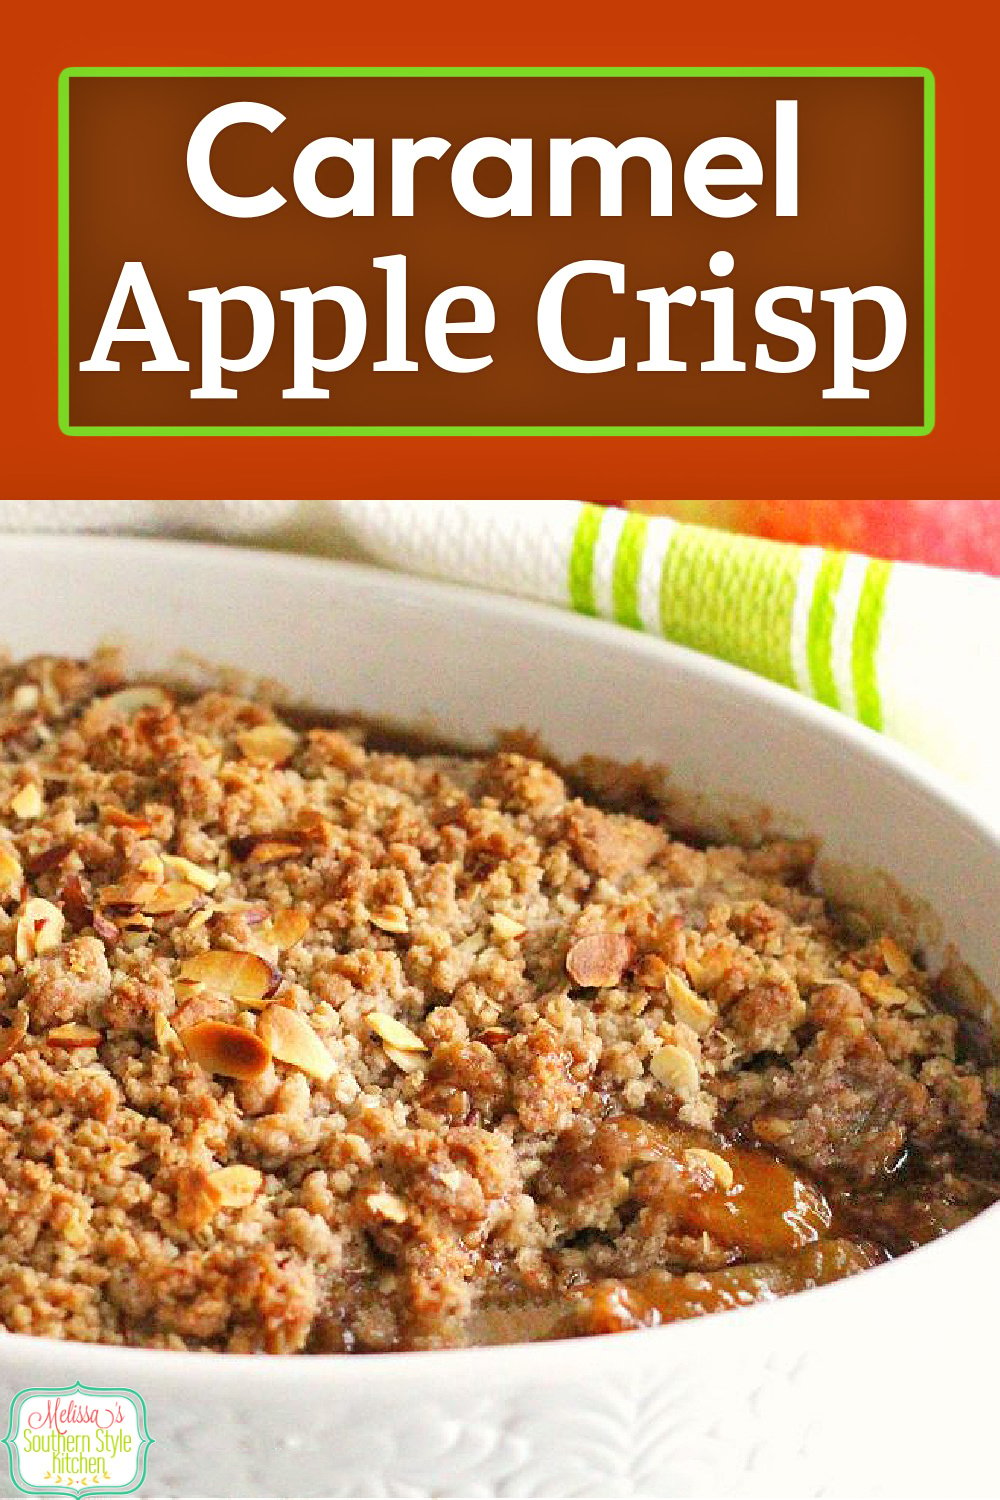 Treat yourself to a big bowl of warm Caramel Apple Crisp and a scoop (or two!) of vanilla ice cream #applecrisp #caramelapplecrisp #caramelapples #applecobbler #applerecipes #harvest #falldesserts #desserts #dessertfoodrecipes #holidayrecipes #thanksgivingdesserts #southernfood #apples #southernrecipes via @melissasssk